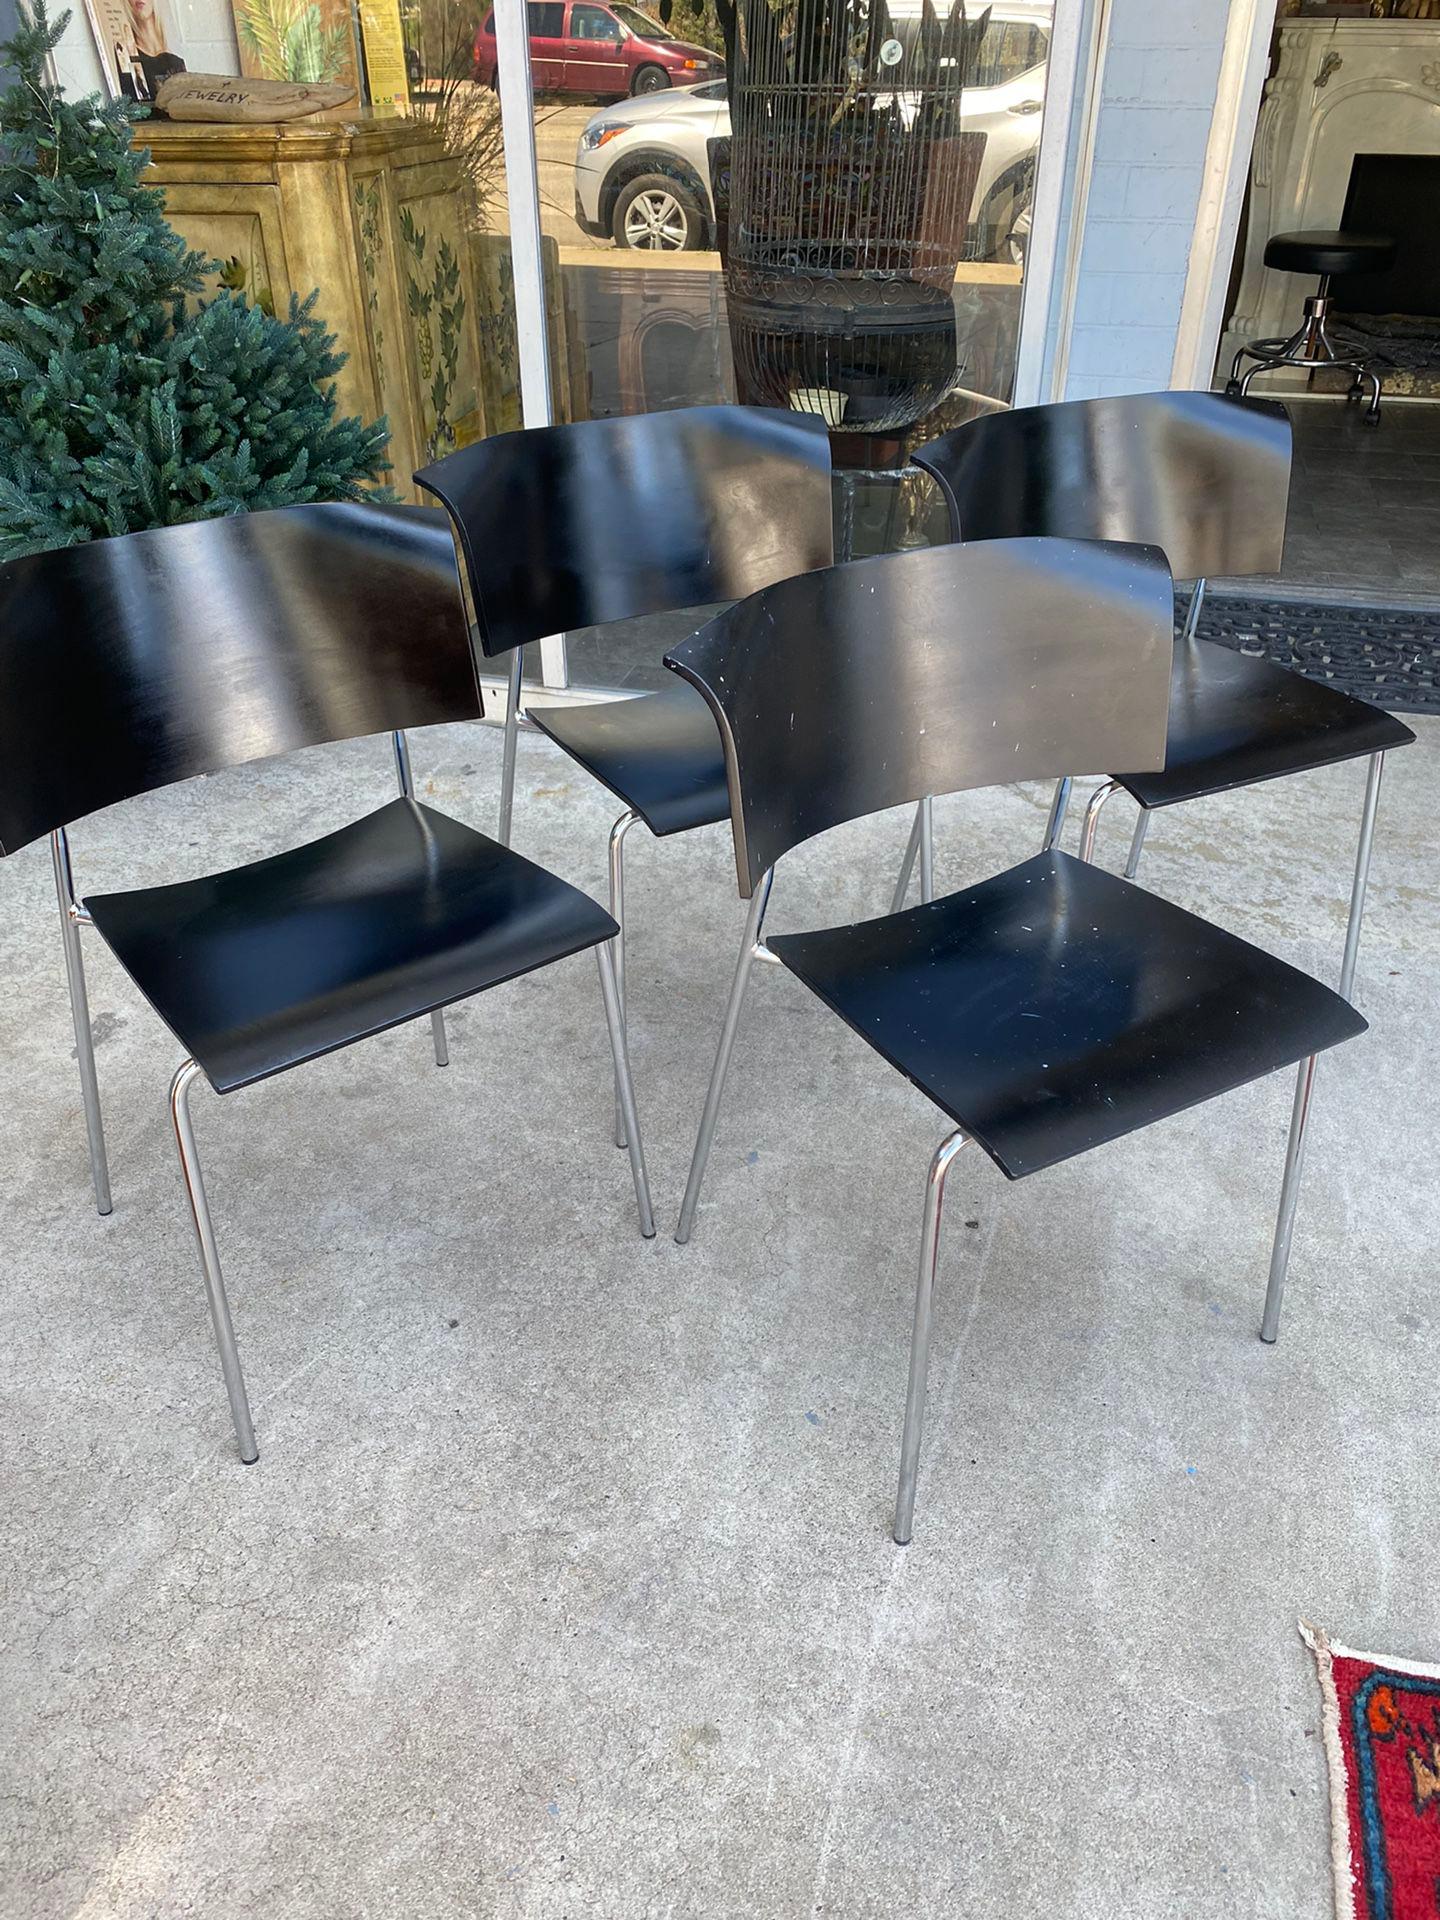 Late 20th Century Postmodern Four Stackable Black Chairs Wood and Chrome Sweden ICF Group